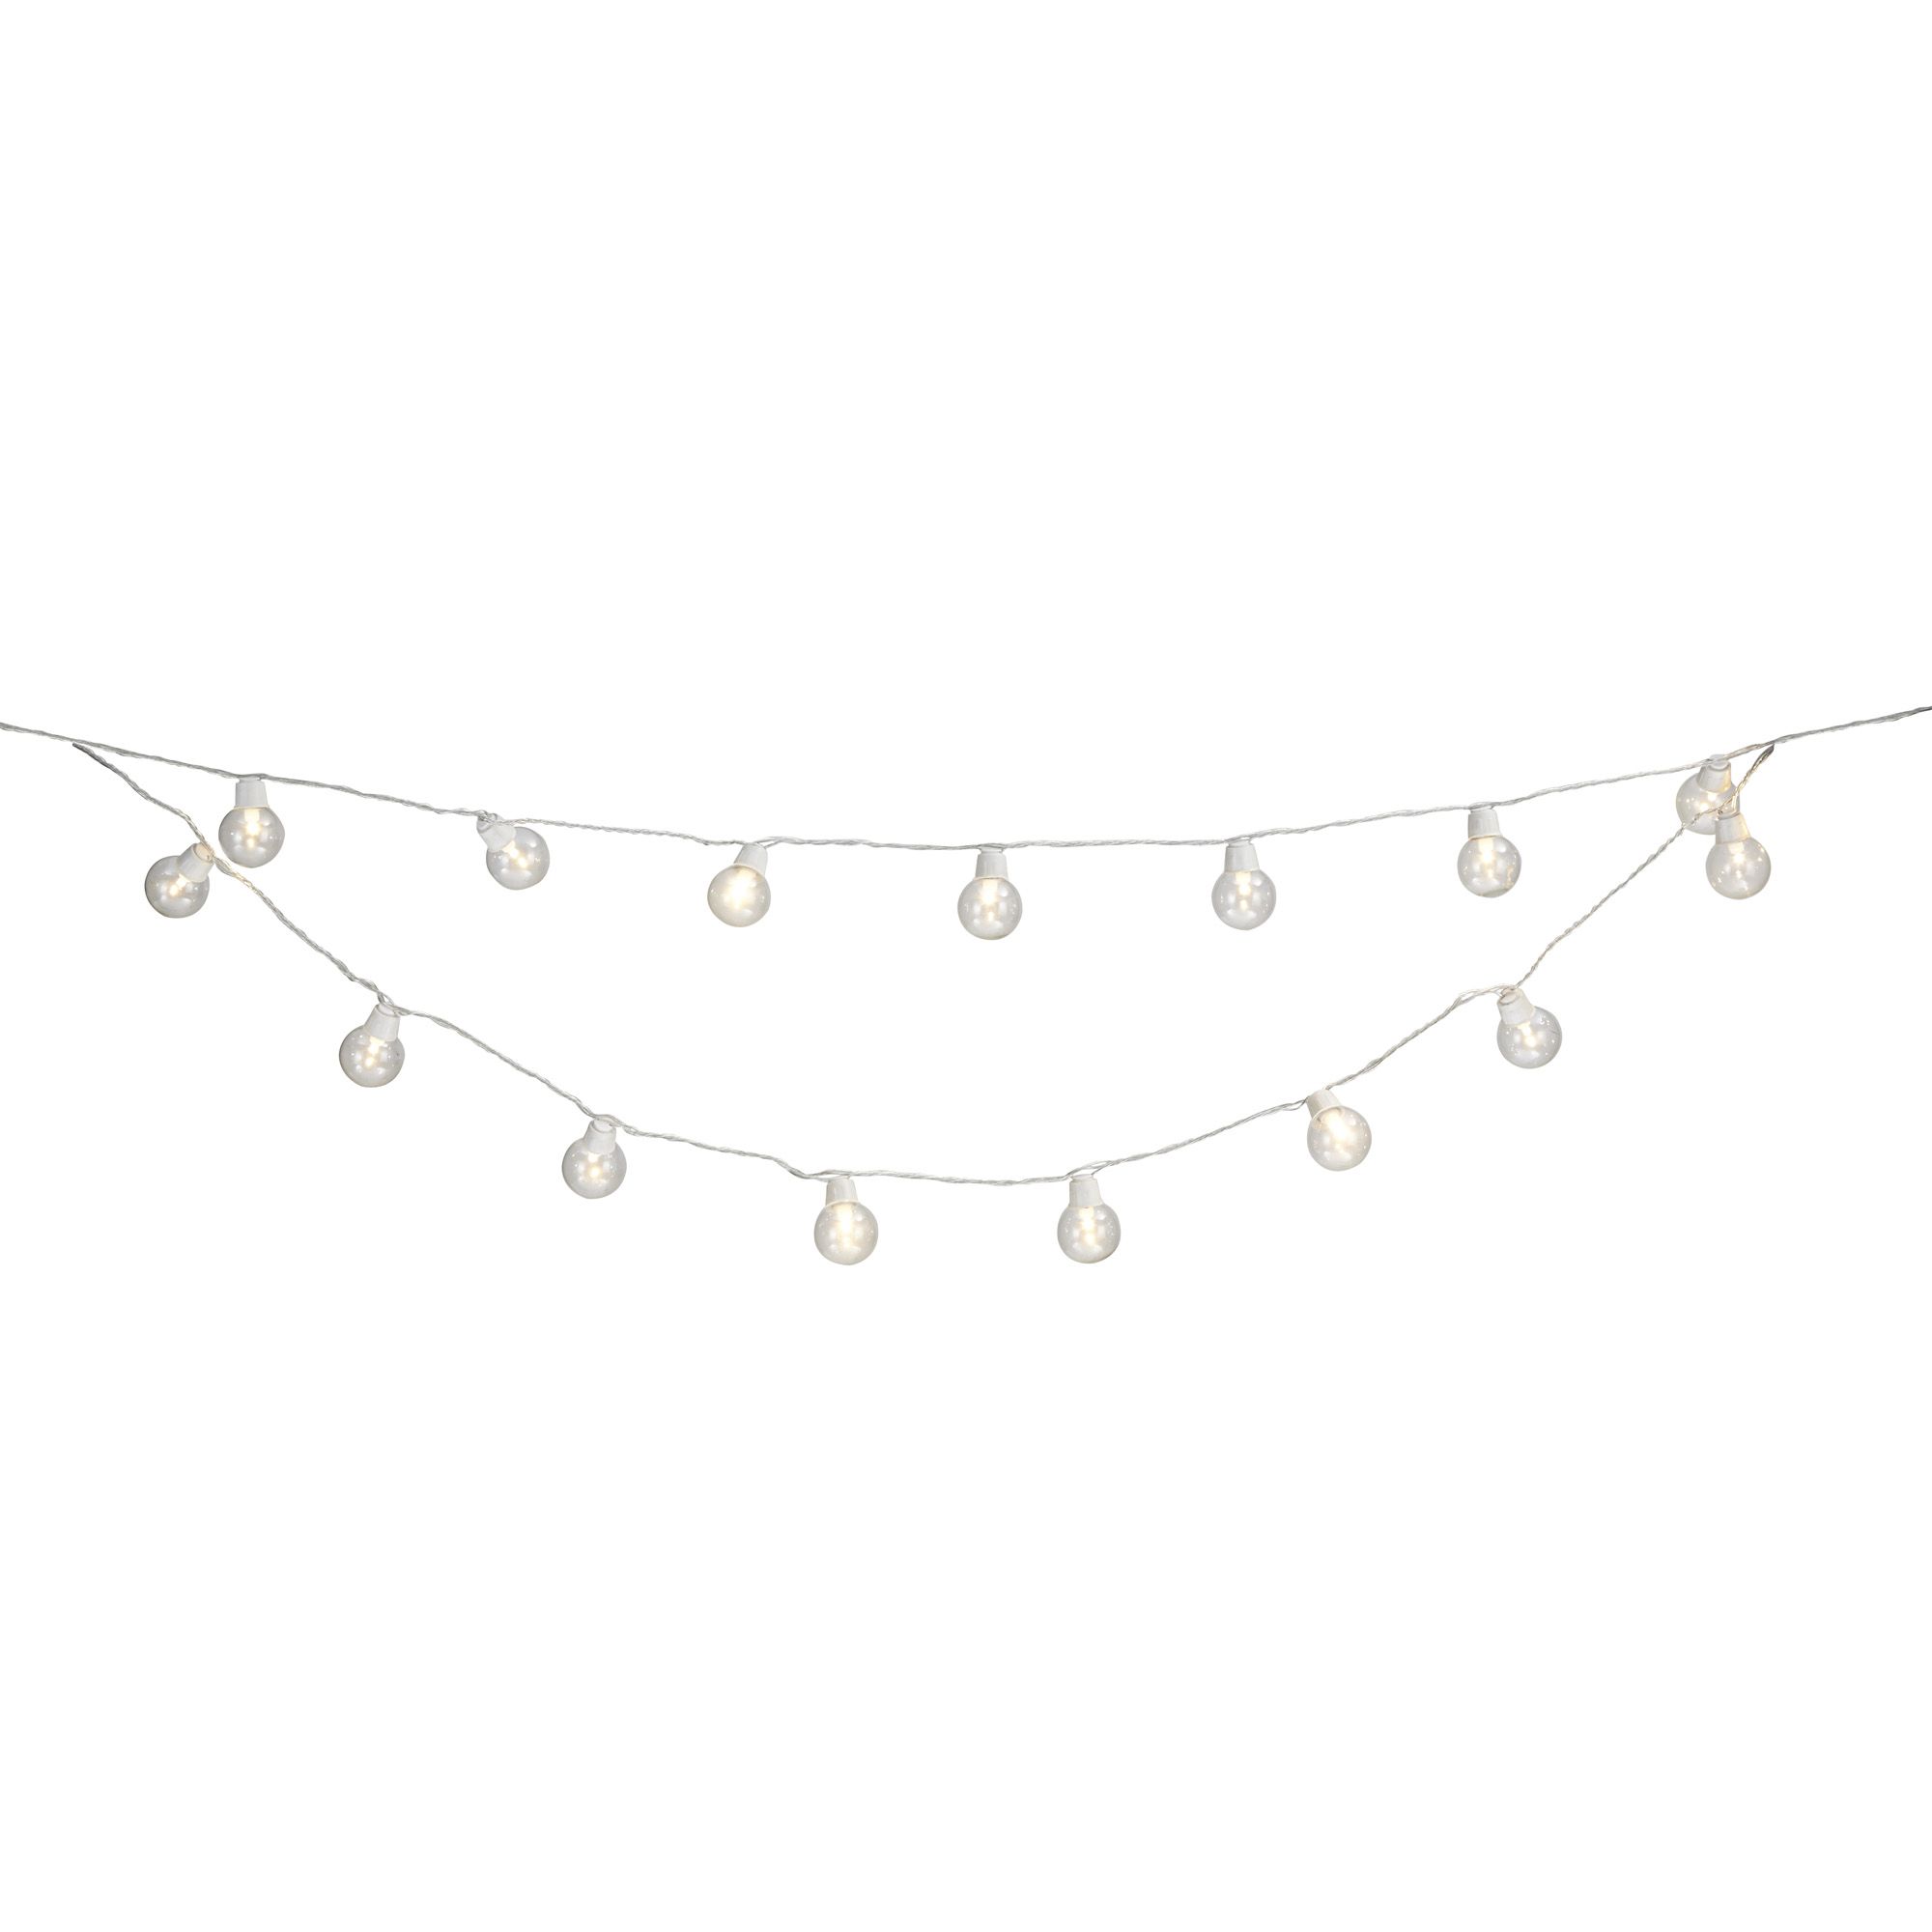 Blooma Auva Mains Powered White 50 LED String Lights | Departments ...